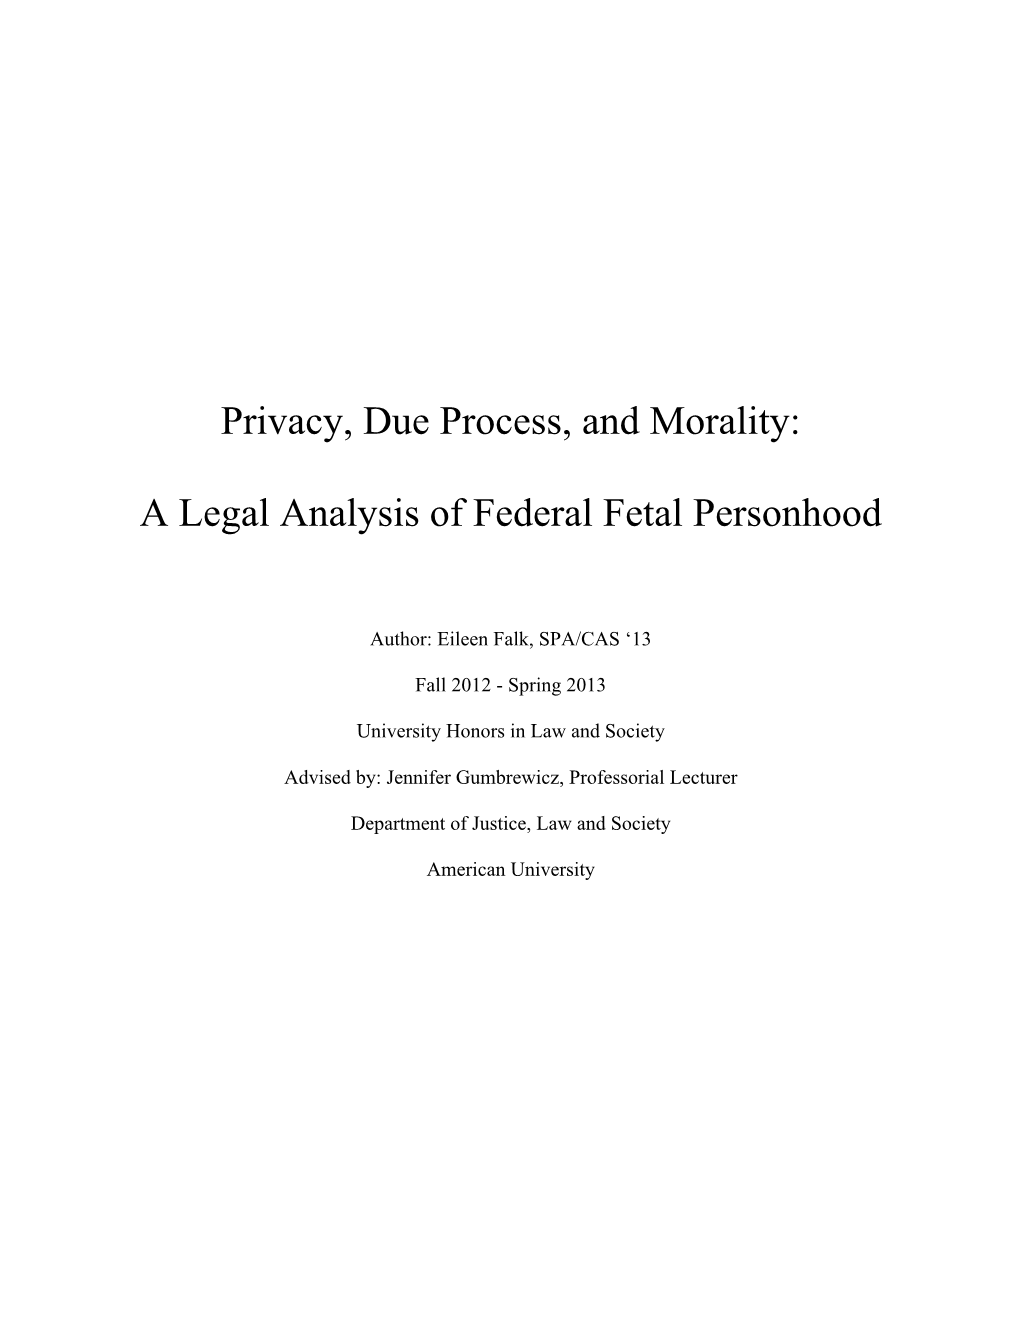 Privacy, Due Process, and Morality: a Legal Analysis of Federal Fetal